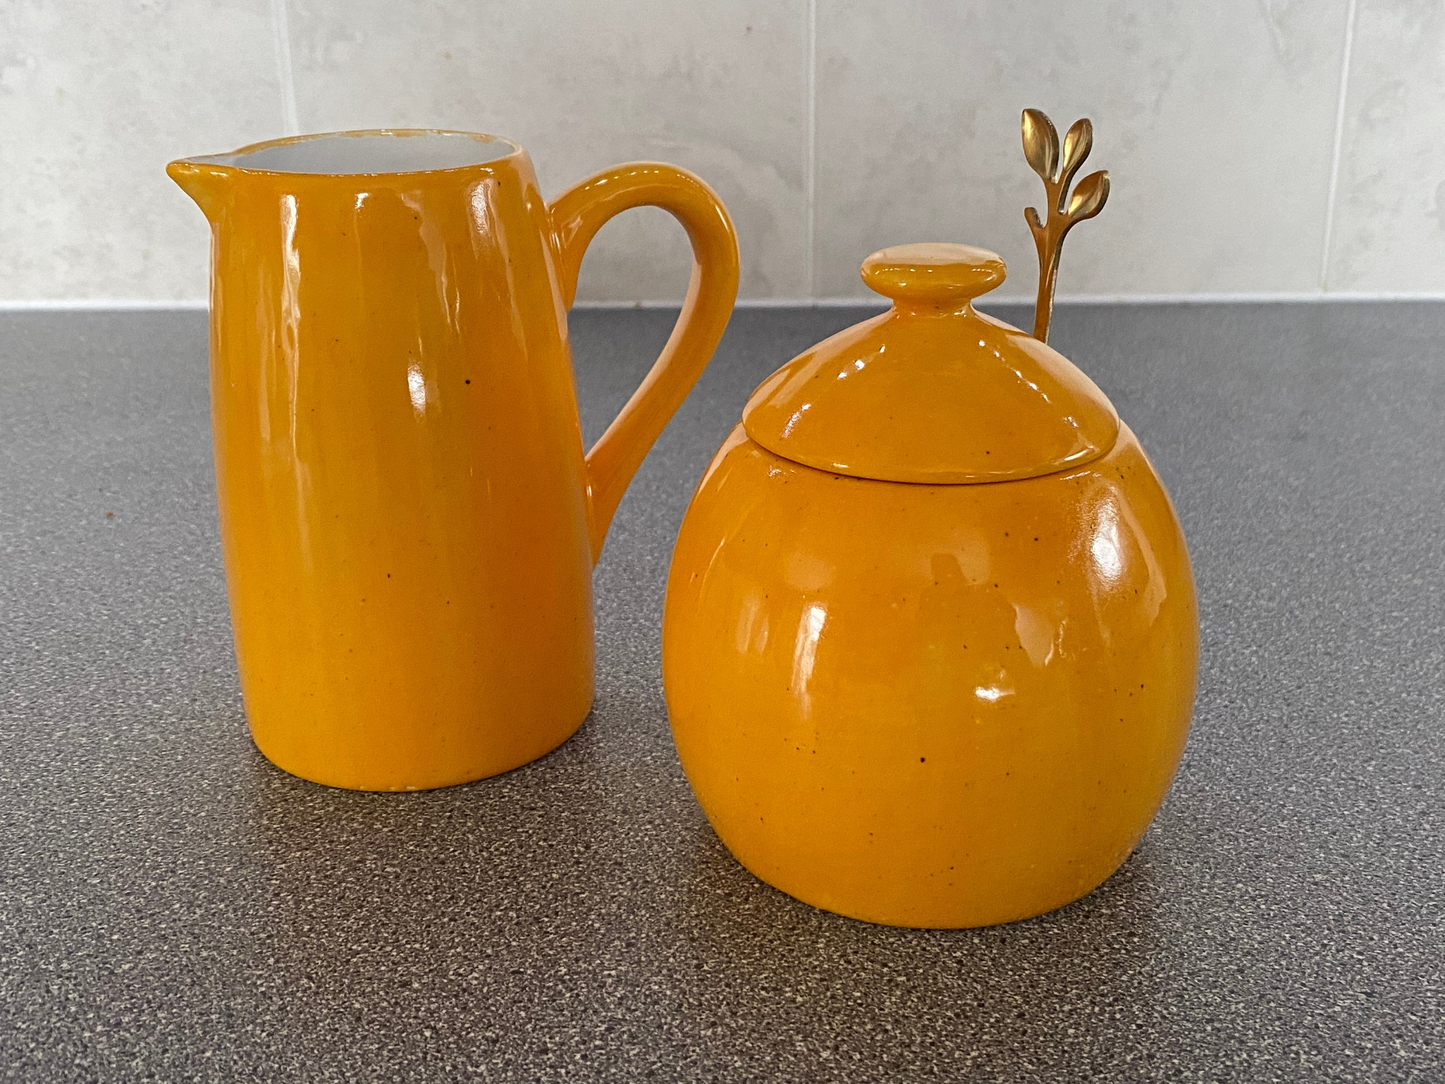 Butter Dish, Sugar Bowl and Milk Jug Set - Speckled Yellow